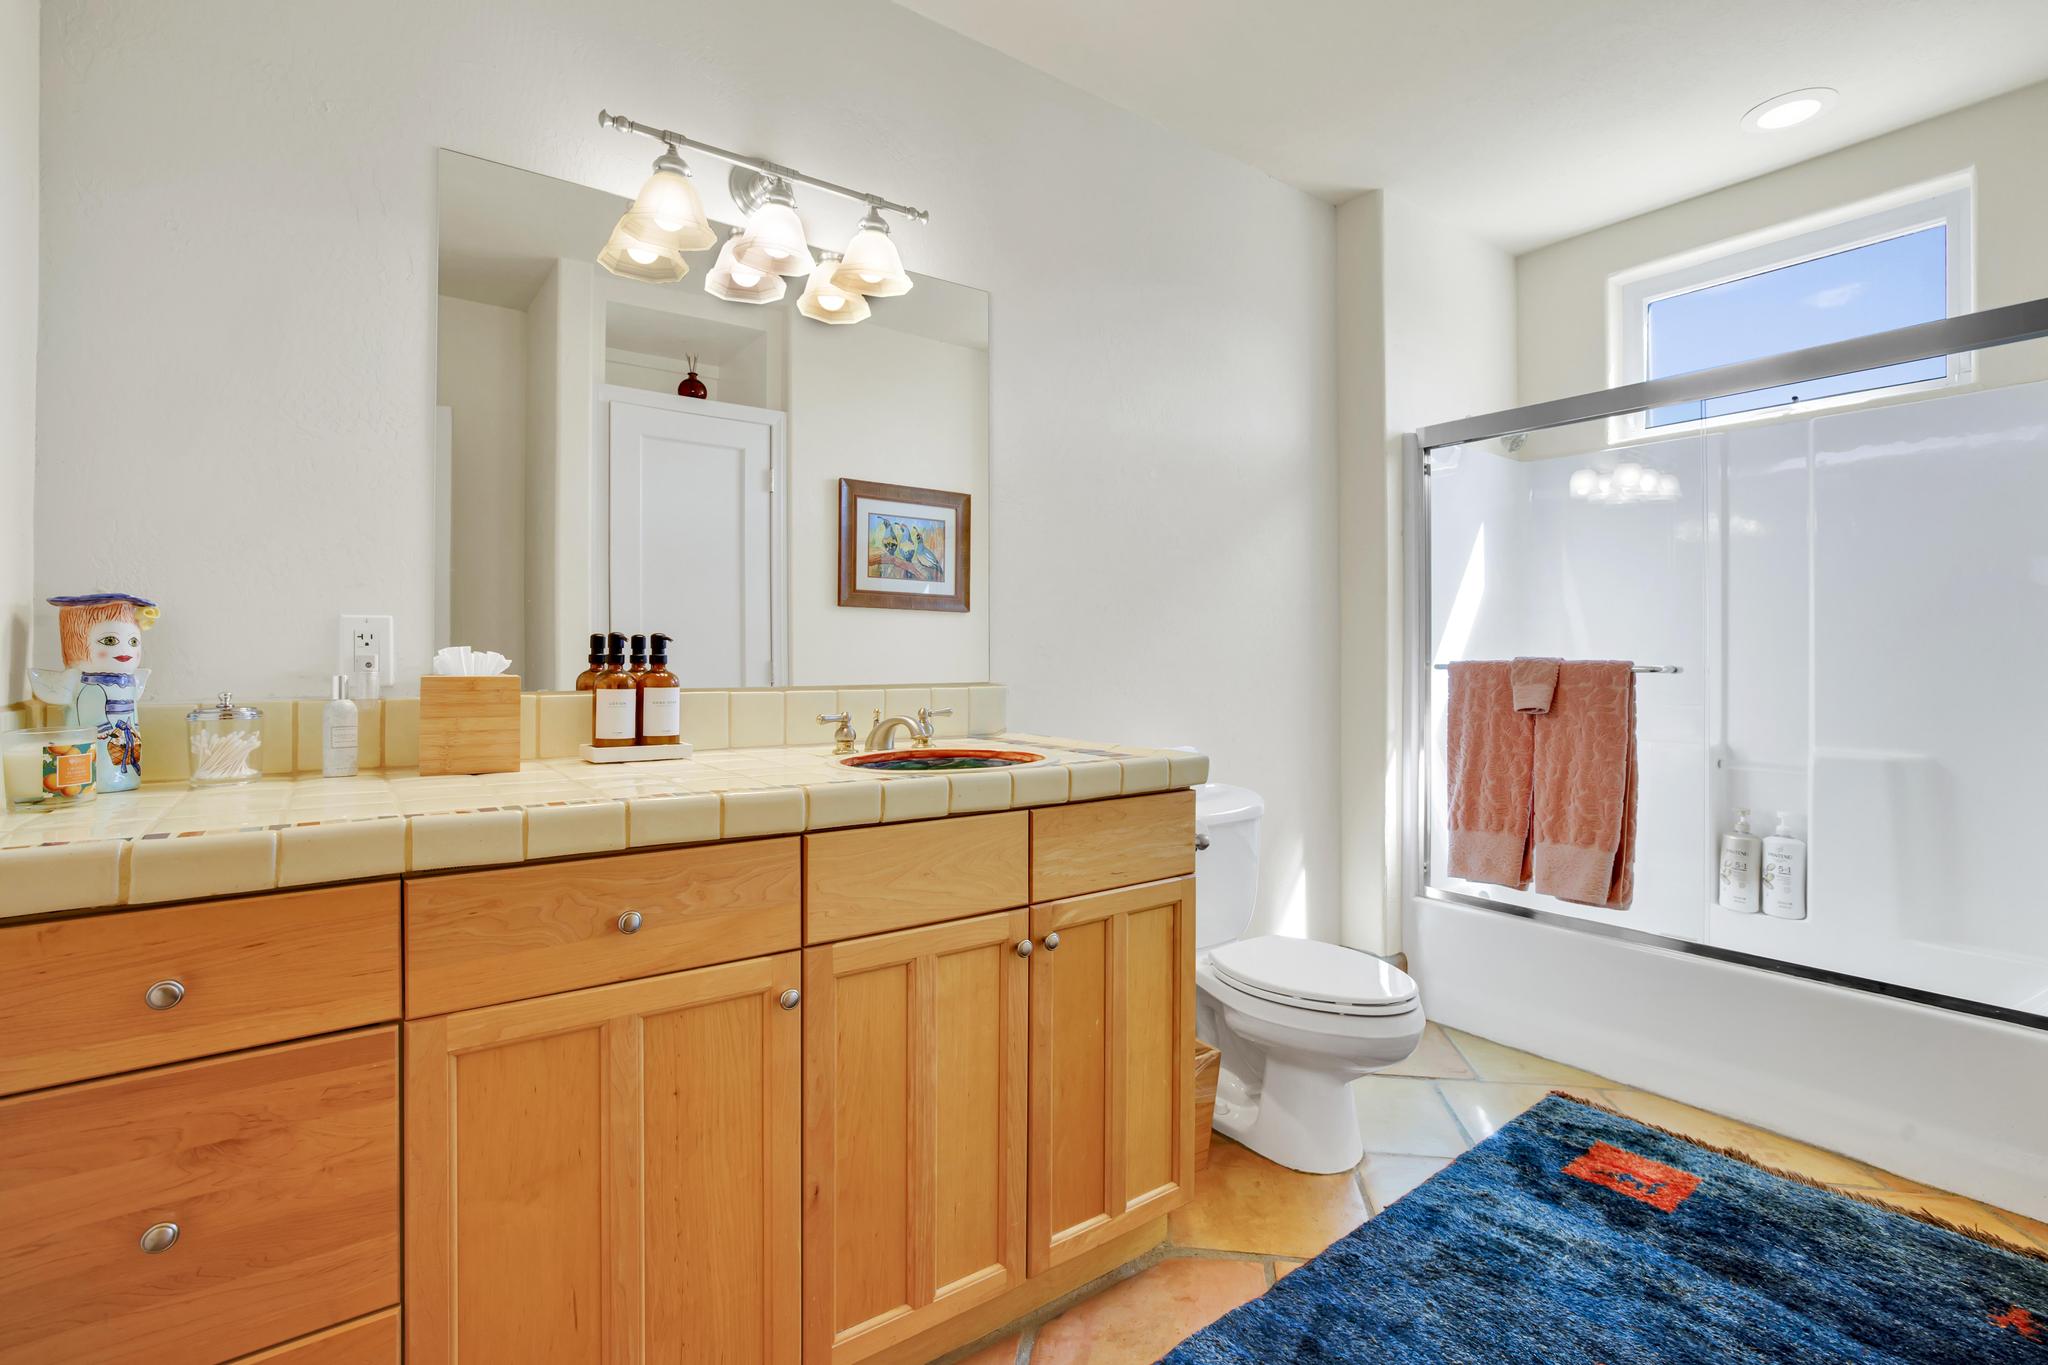 Guest bathroom has a large south facing window with ample vanity space, and a shower/bath combo